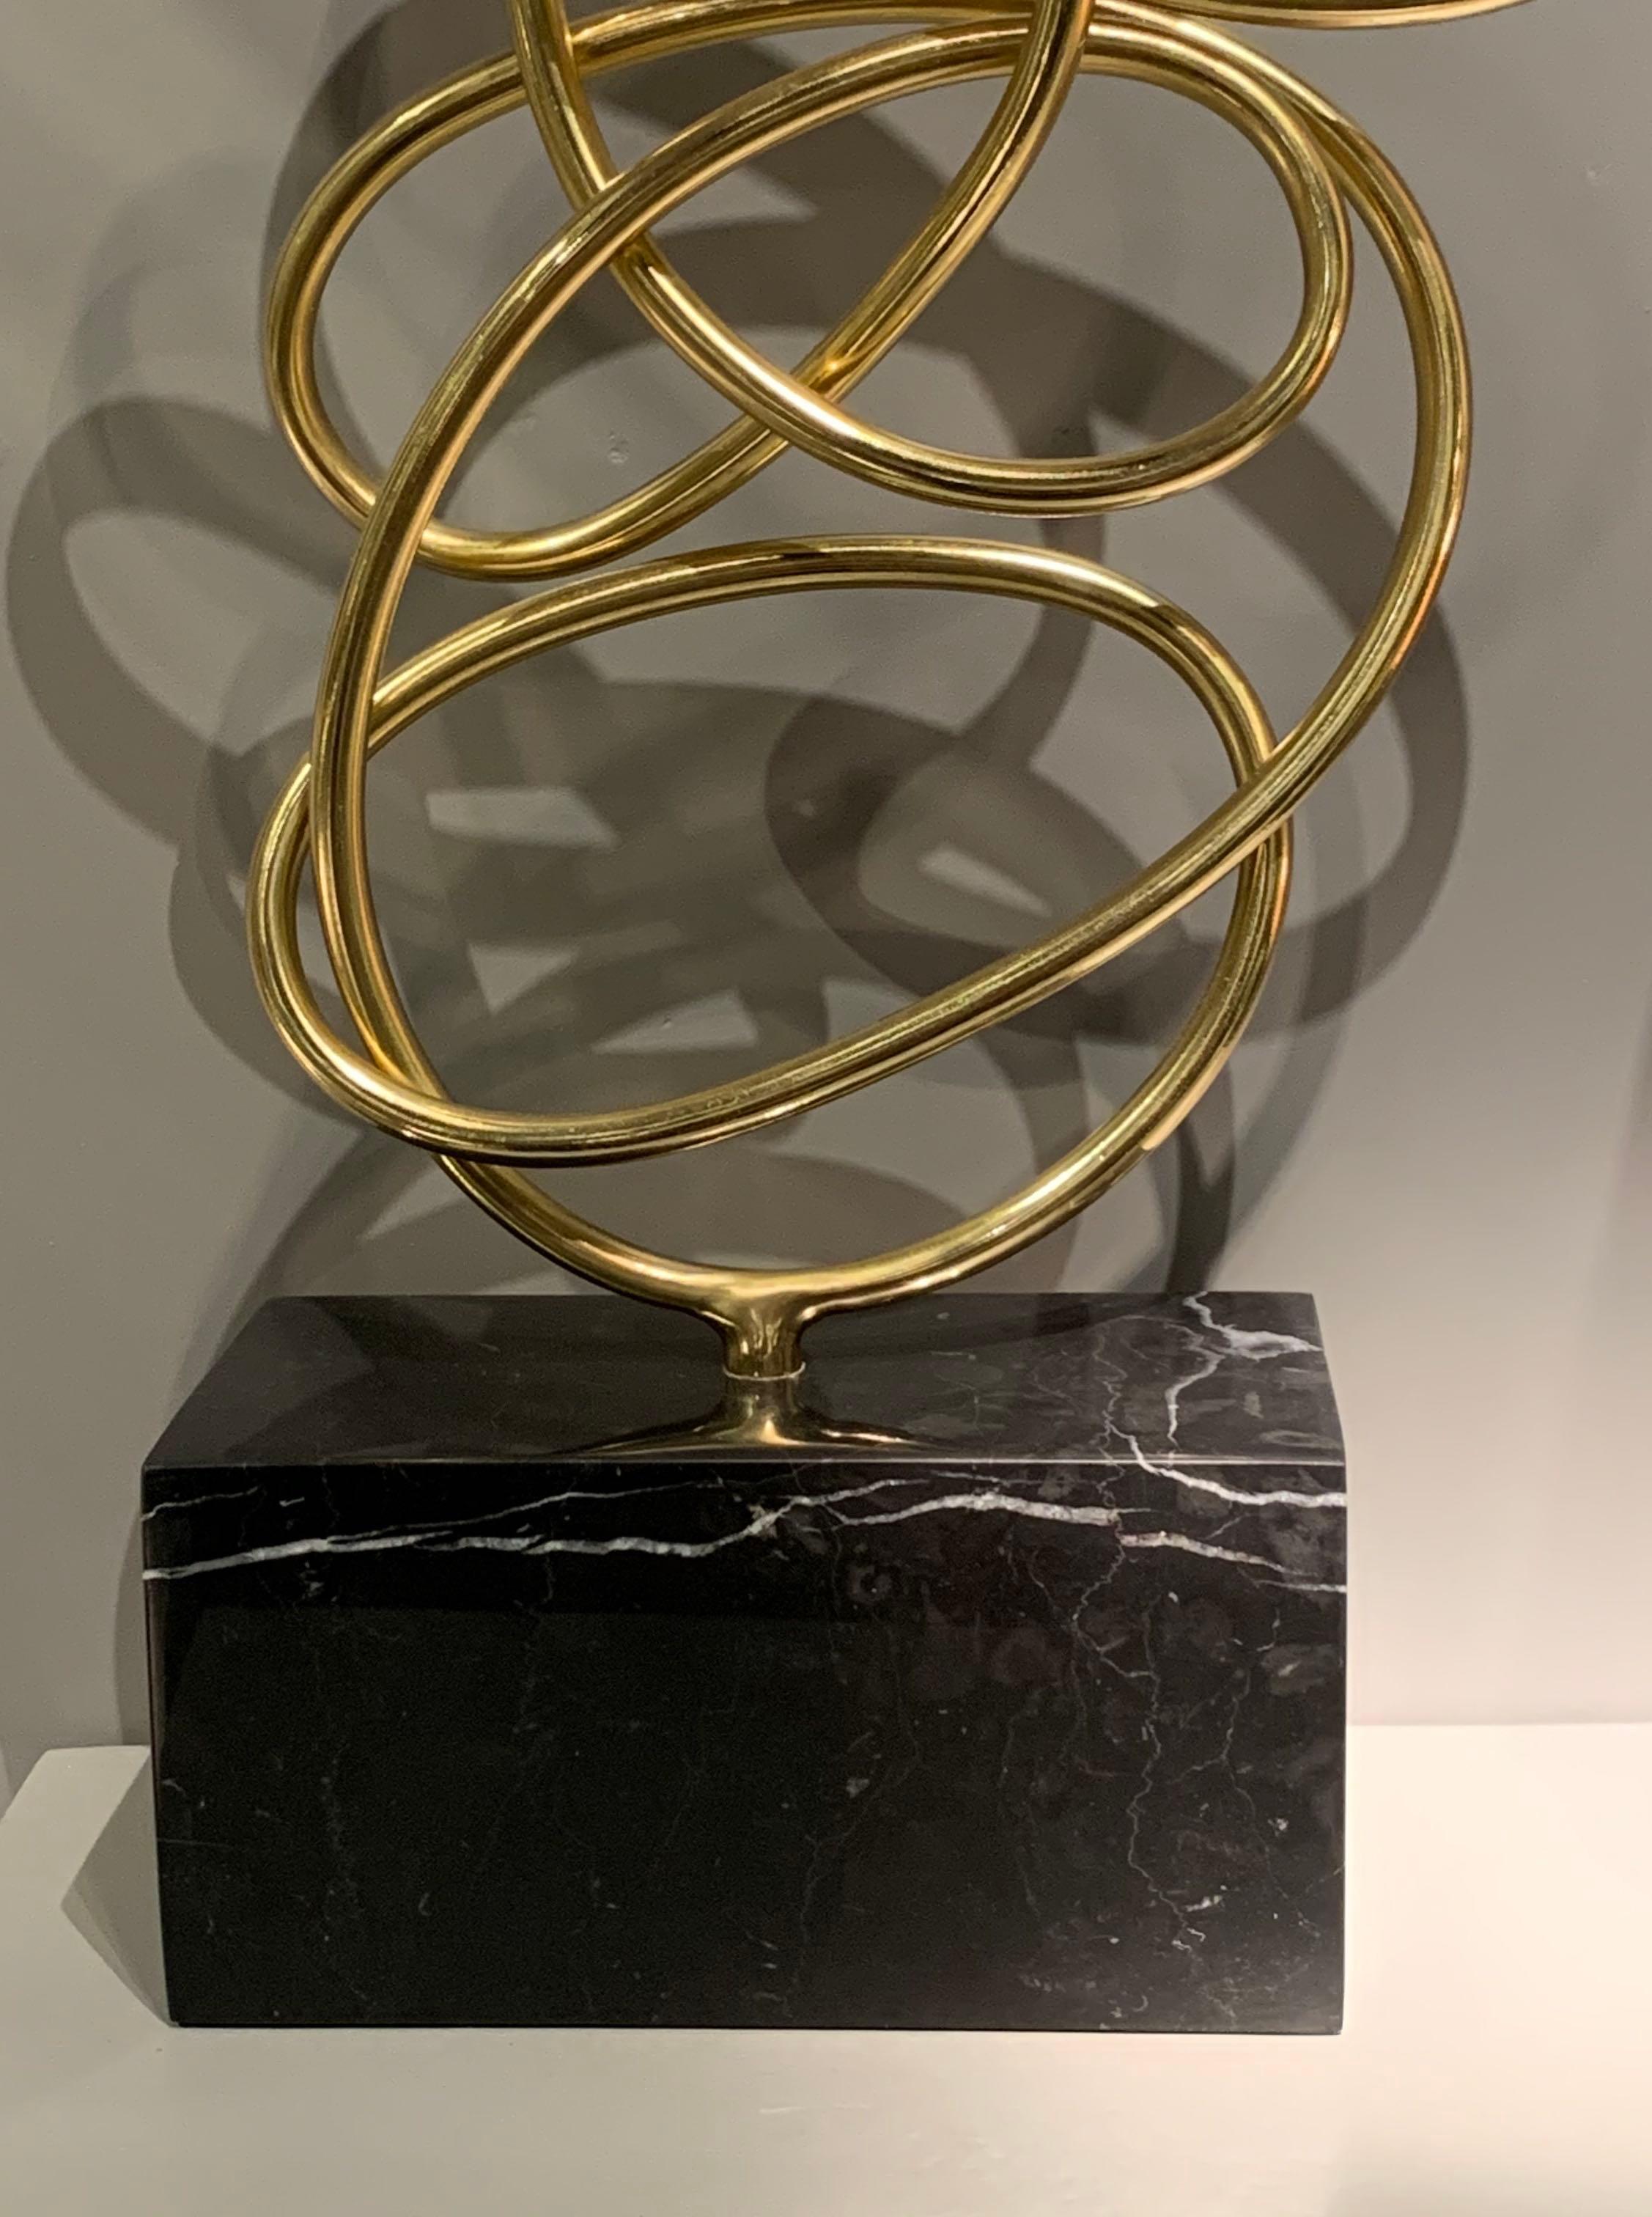 Indonesian Thin Ribbon Shaped Brass Free Form Sculpture, Indonesia, Contemporary